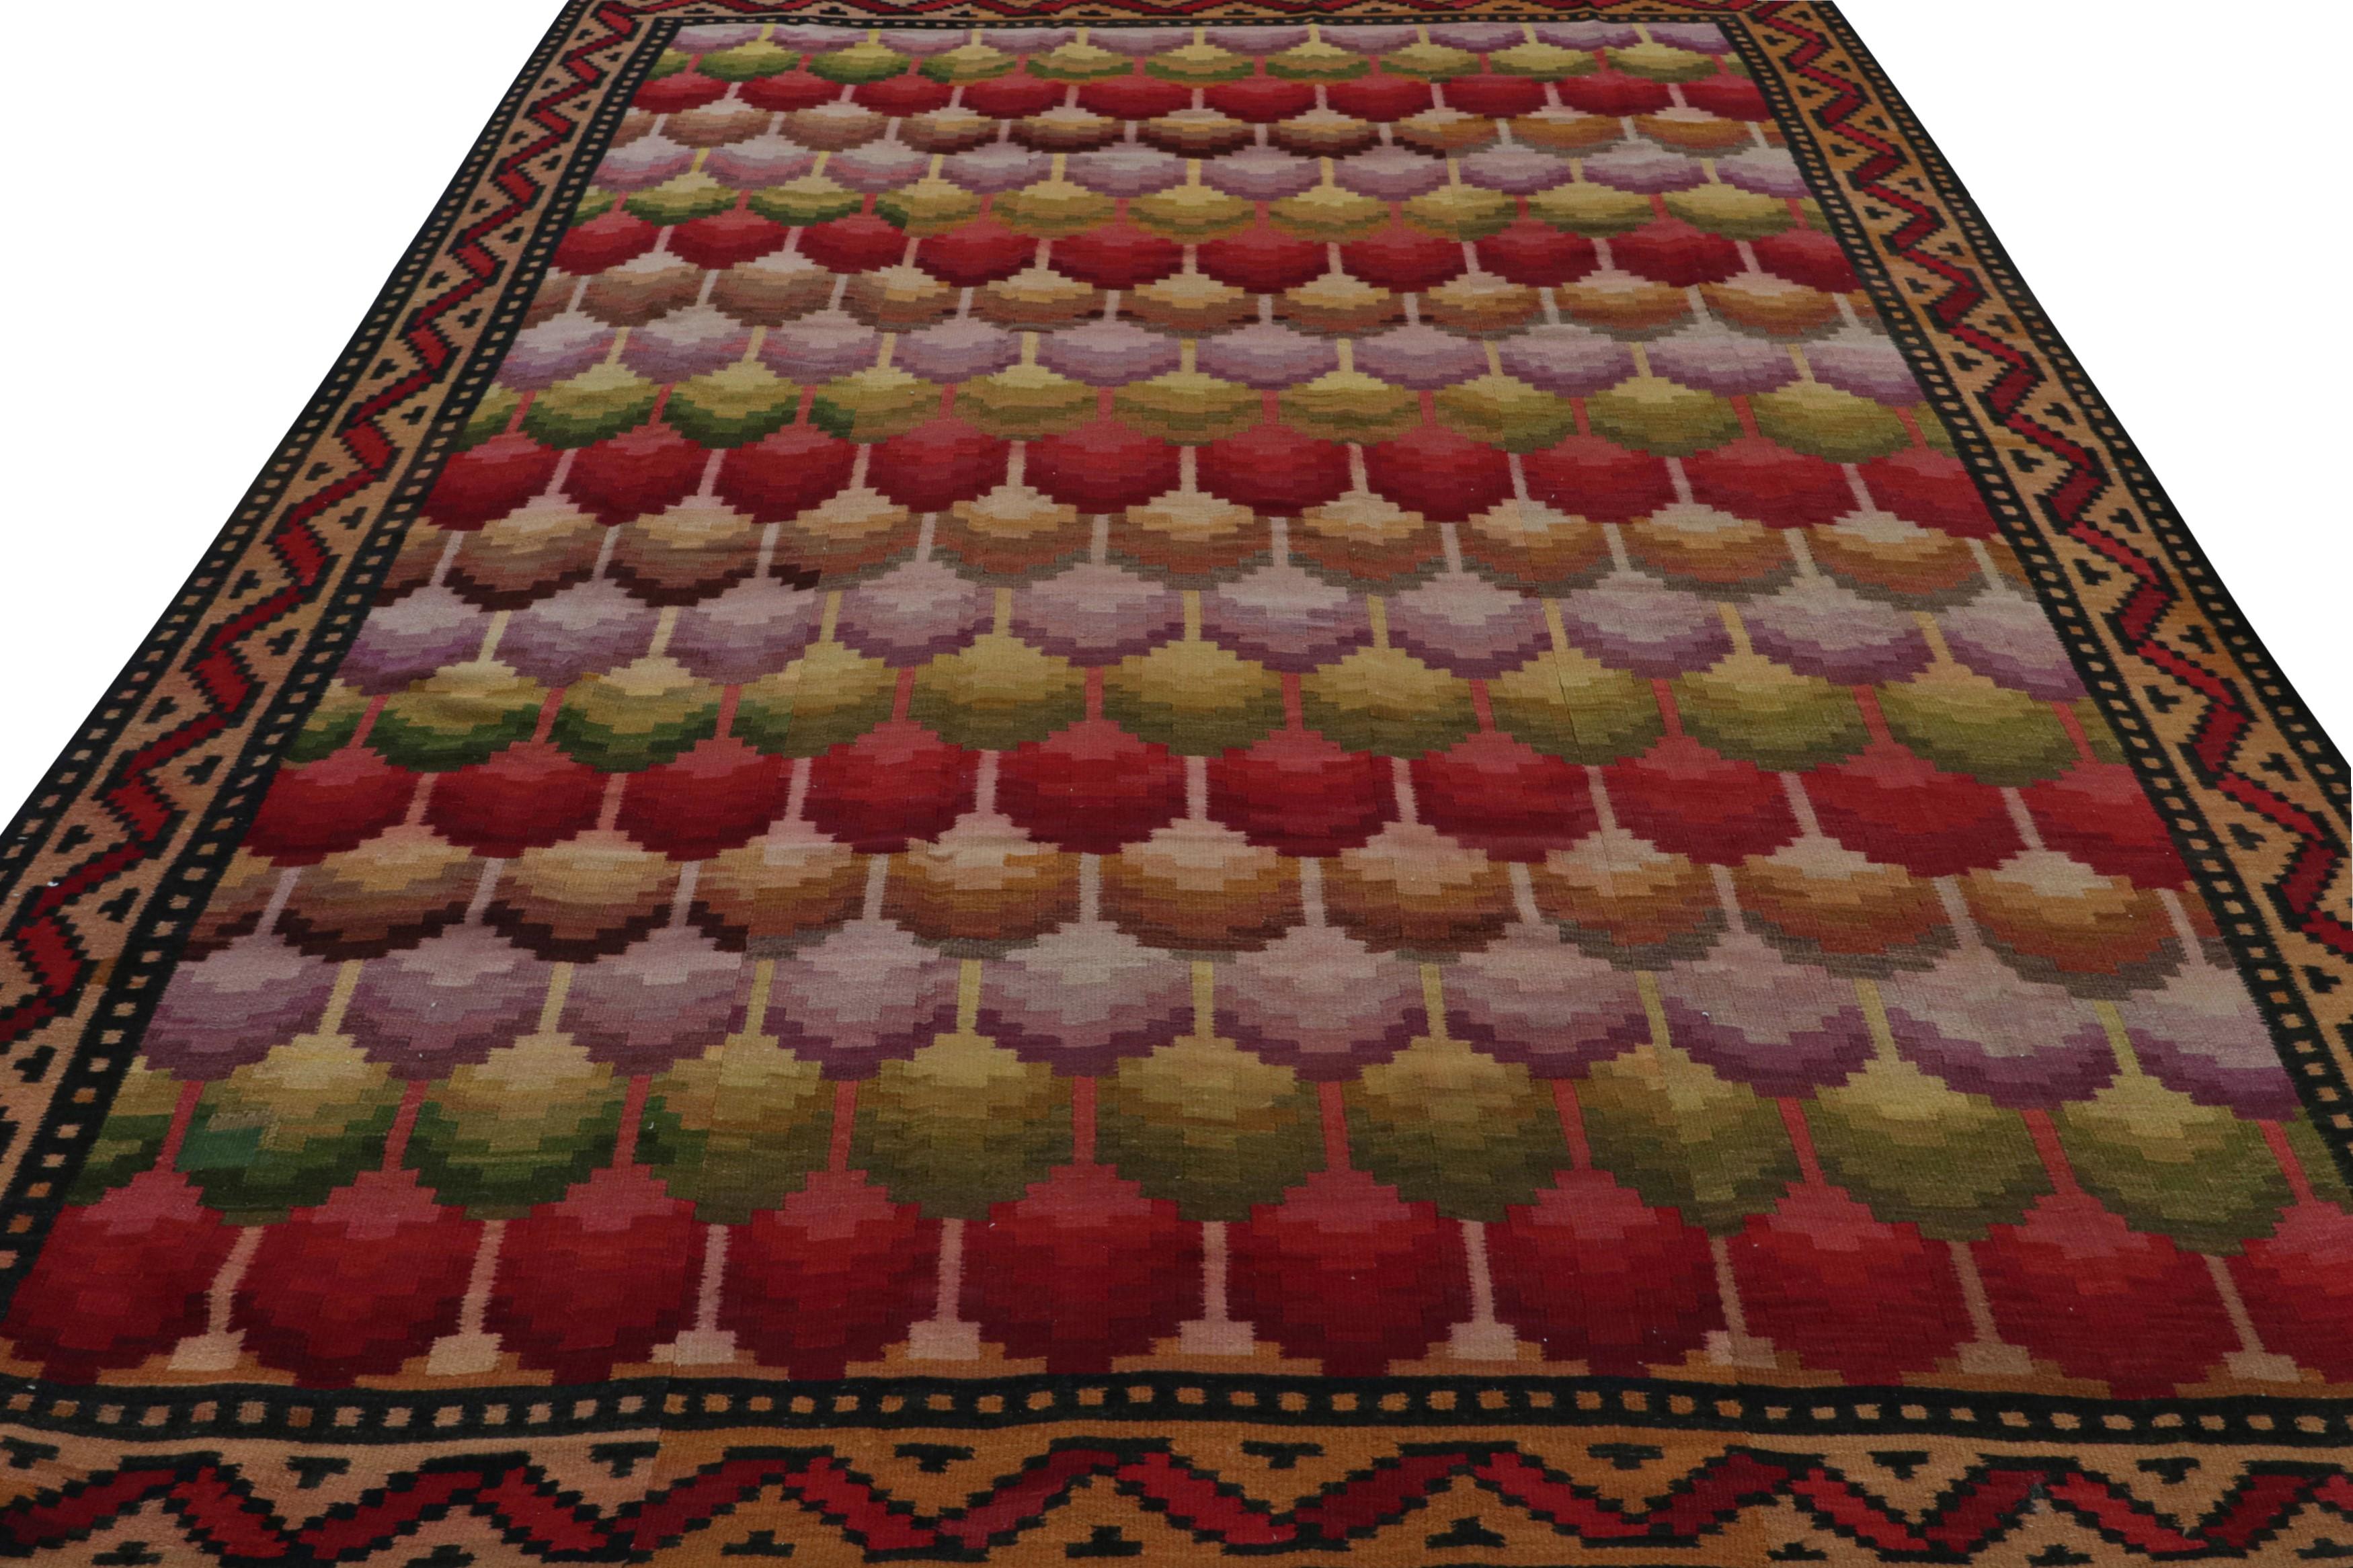 Hand-Knotted Vintage Turkish Kilim in Red, with Geometric Patterns, from Rug & Kilim For Sale